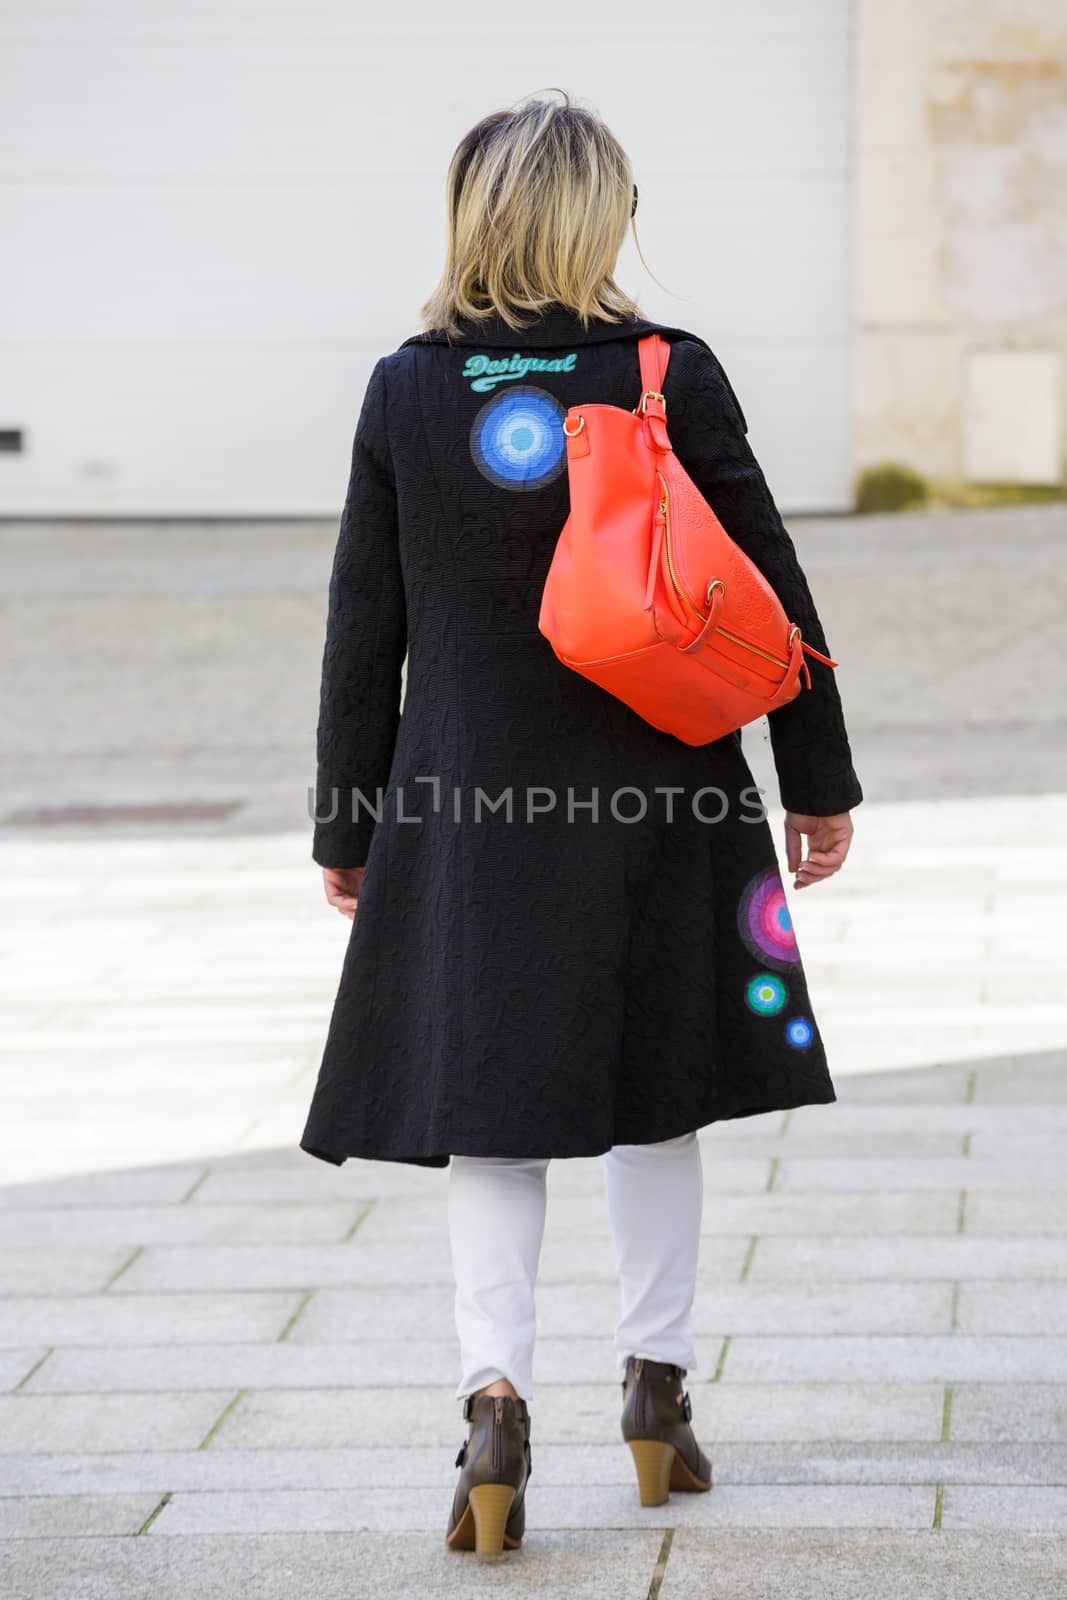 Paris, France - March 27, 2017: Back view of a well dressed blond woman walking on the city streets